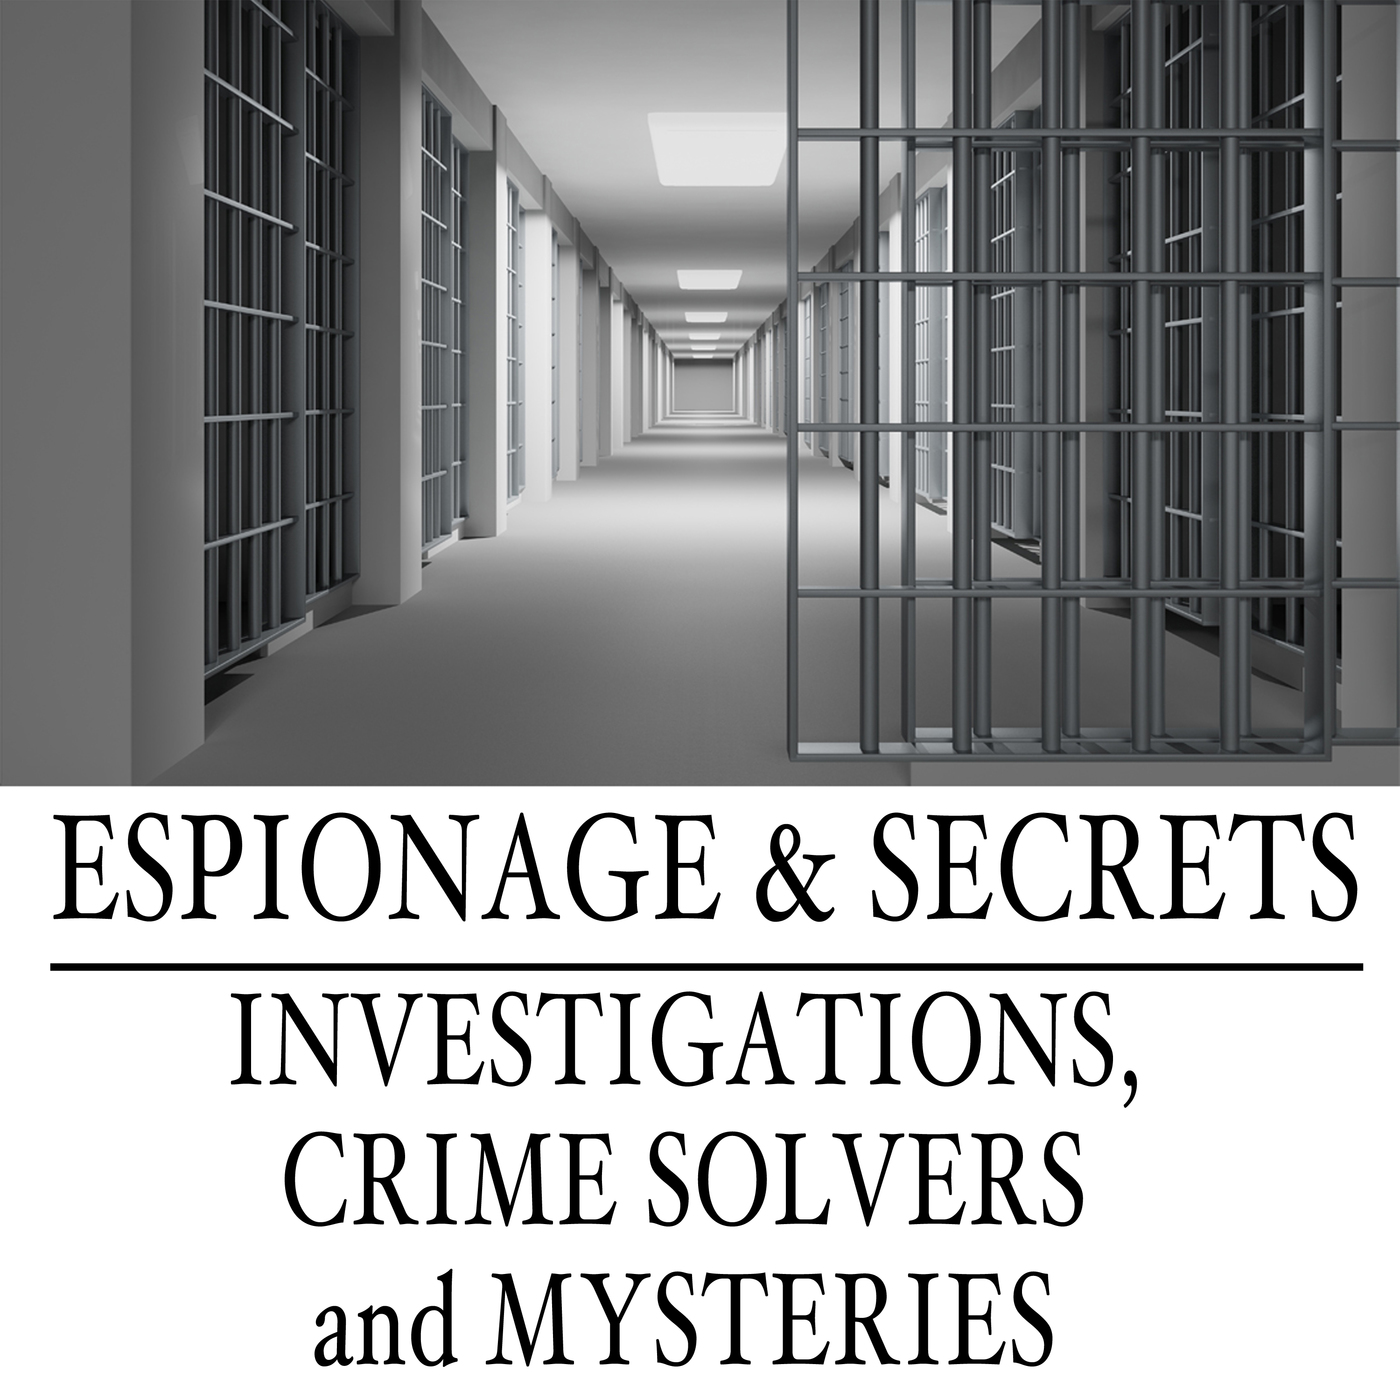 Espionage & Secrets: Investigations, Crime Solvers and Mysteries